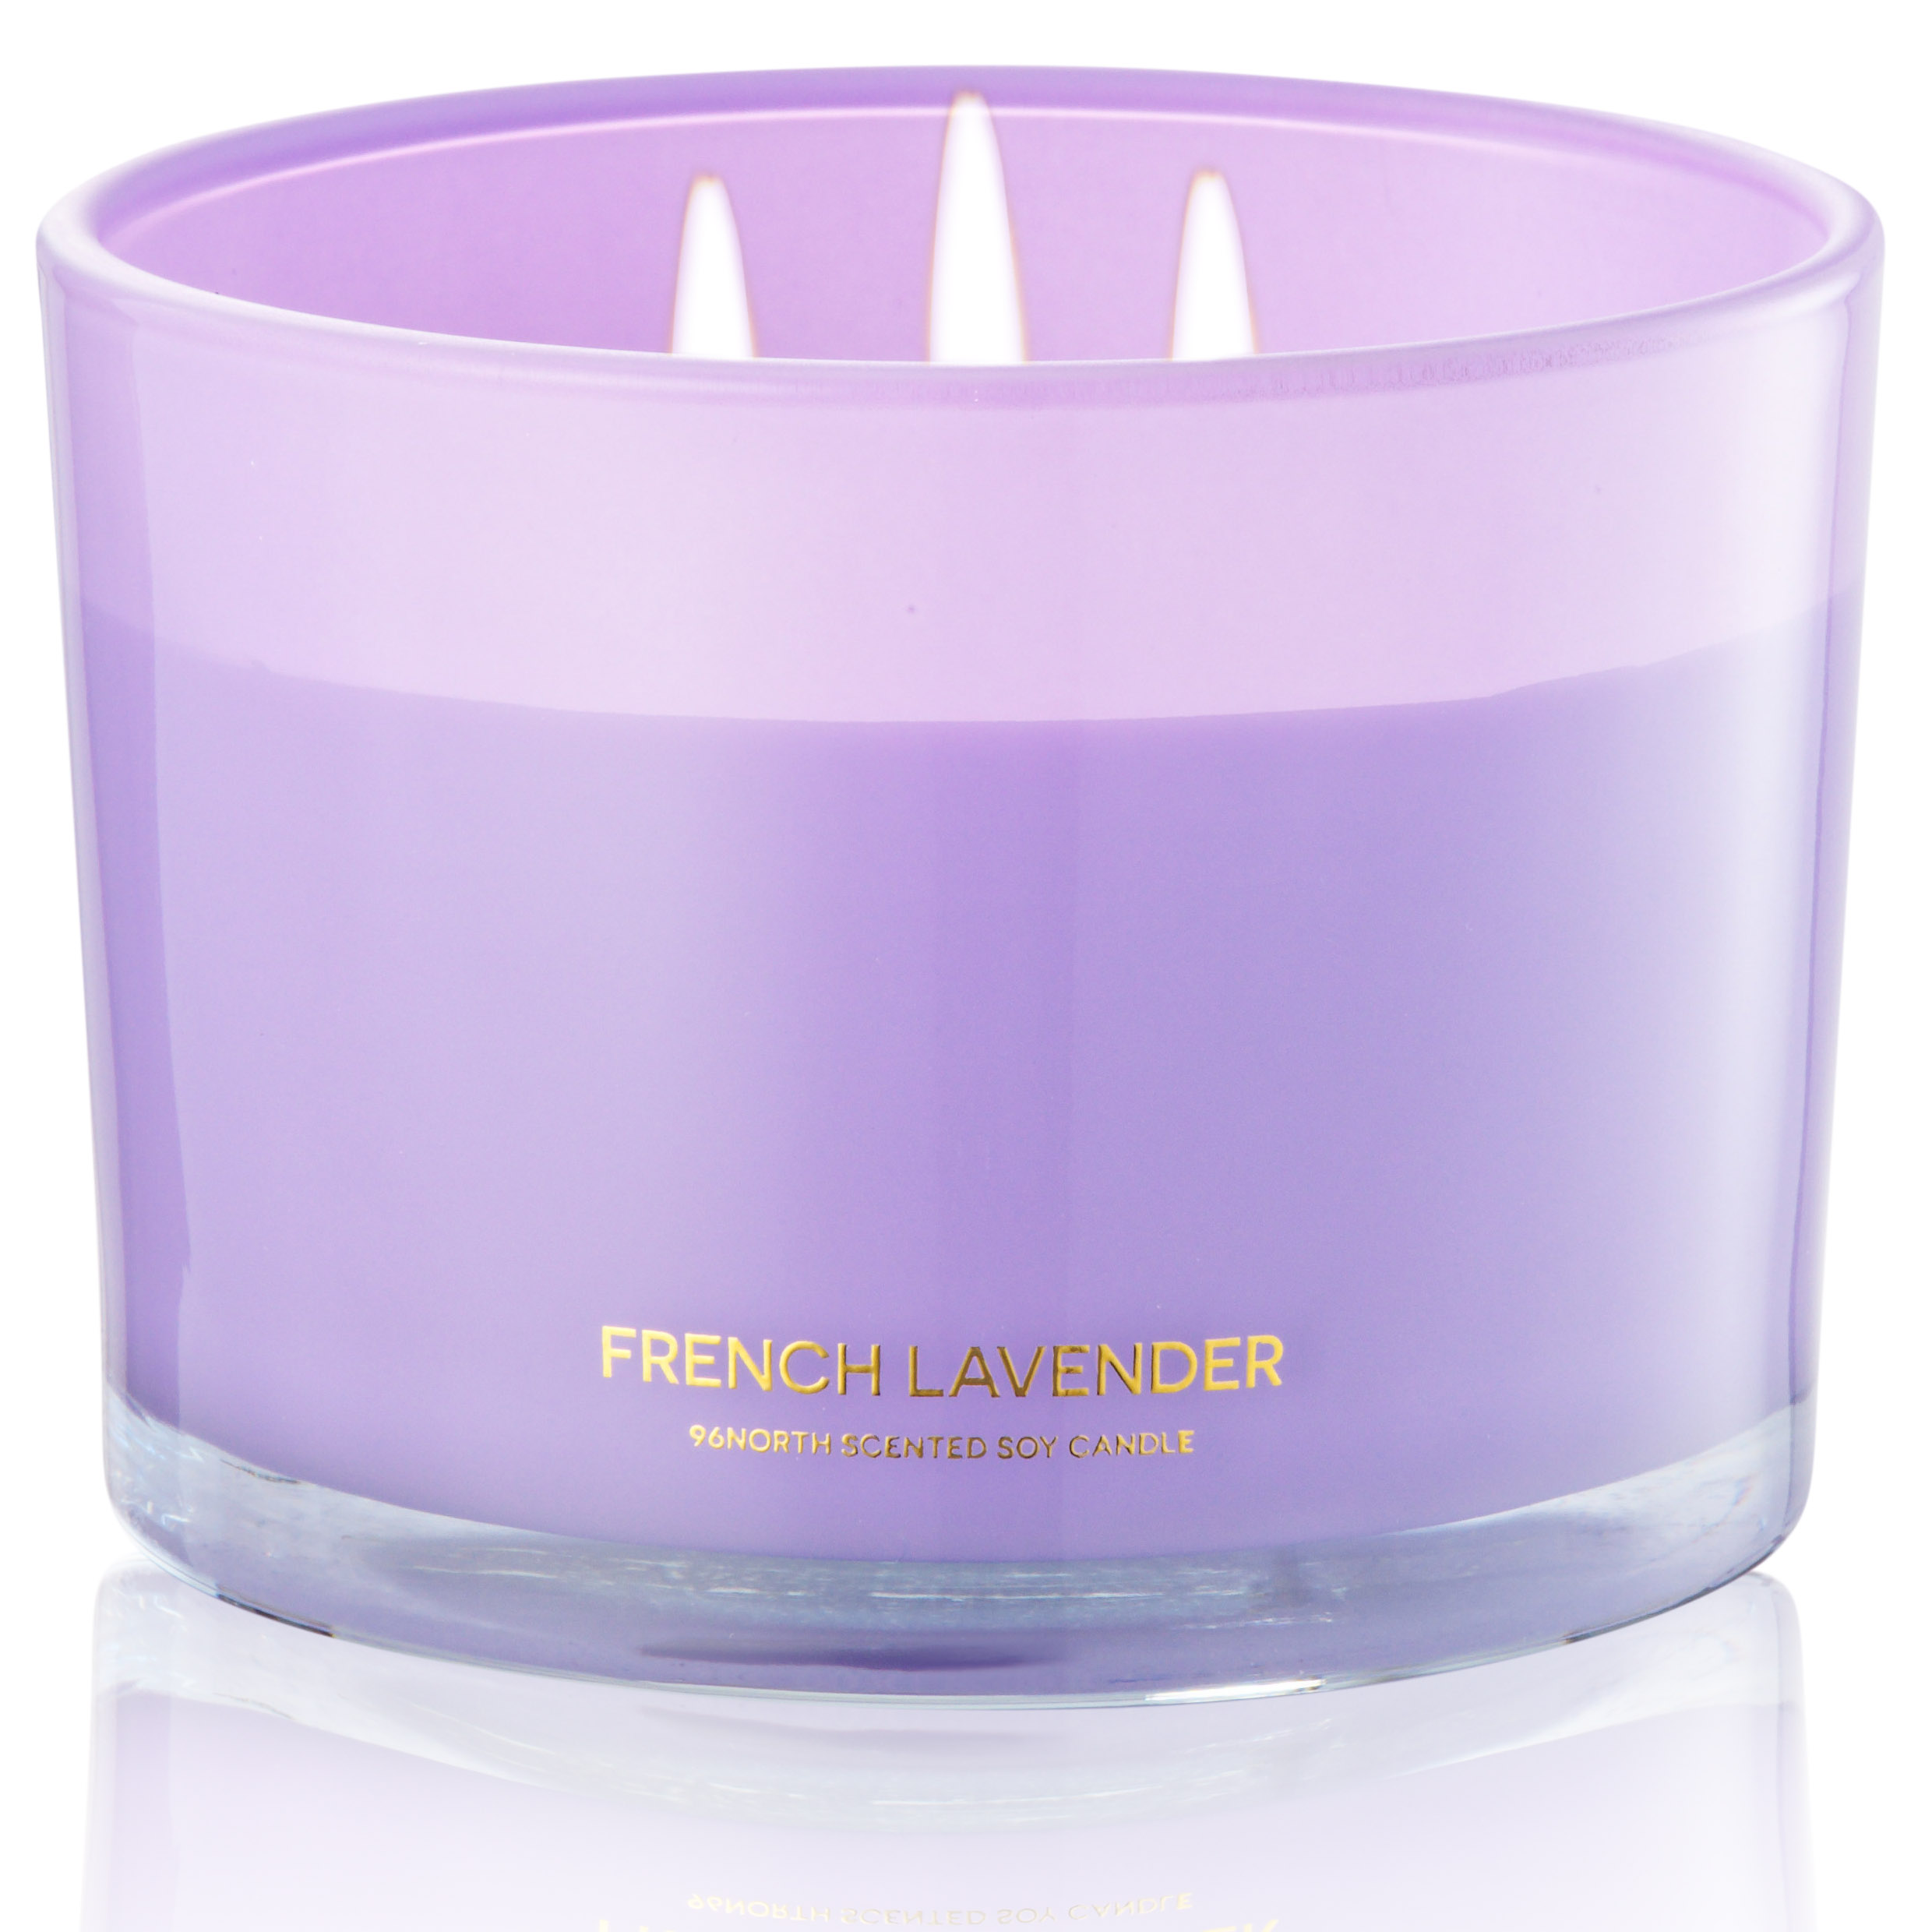 3 Wick Lavender Candle, Stress Relief Gifts for Women, Soy Candles for Home